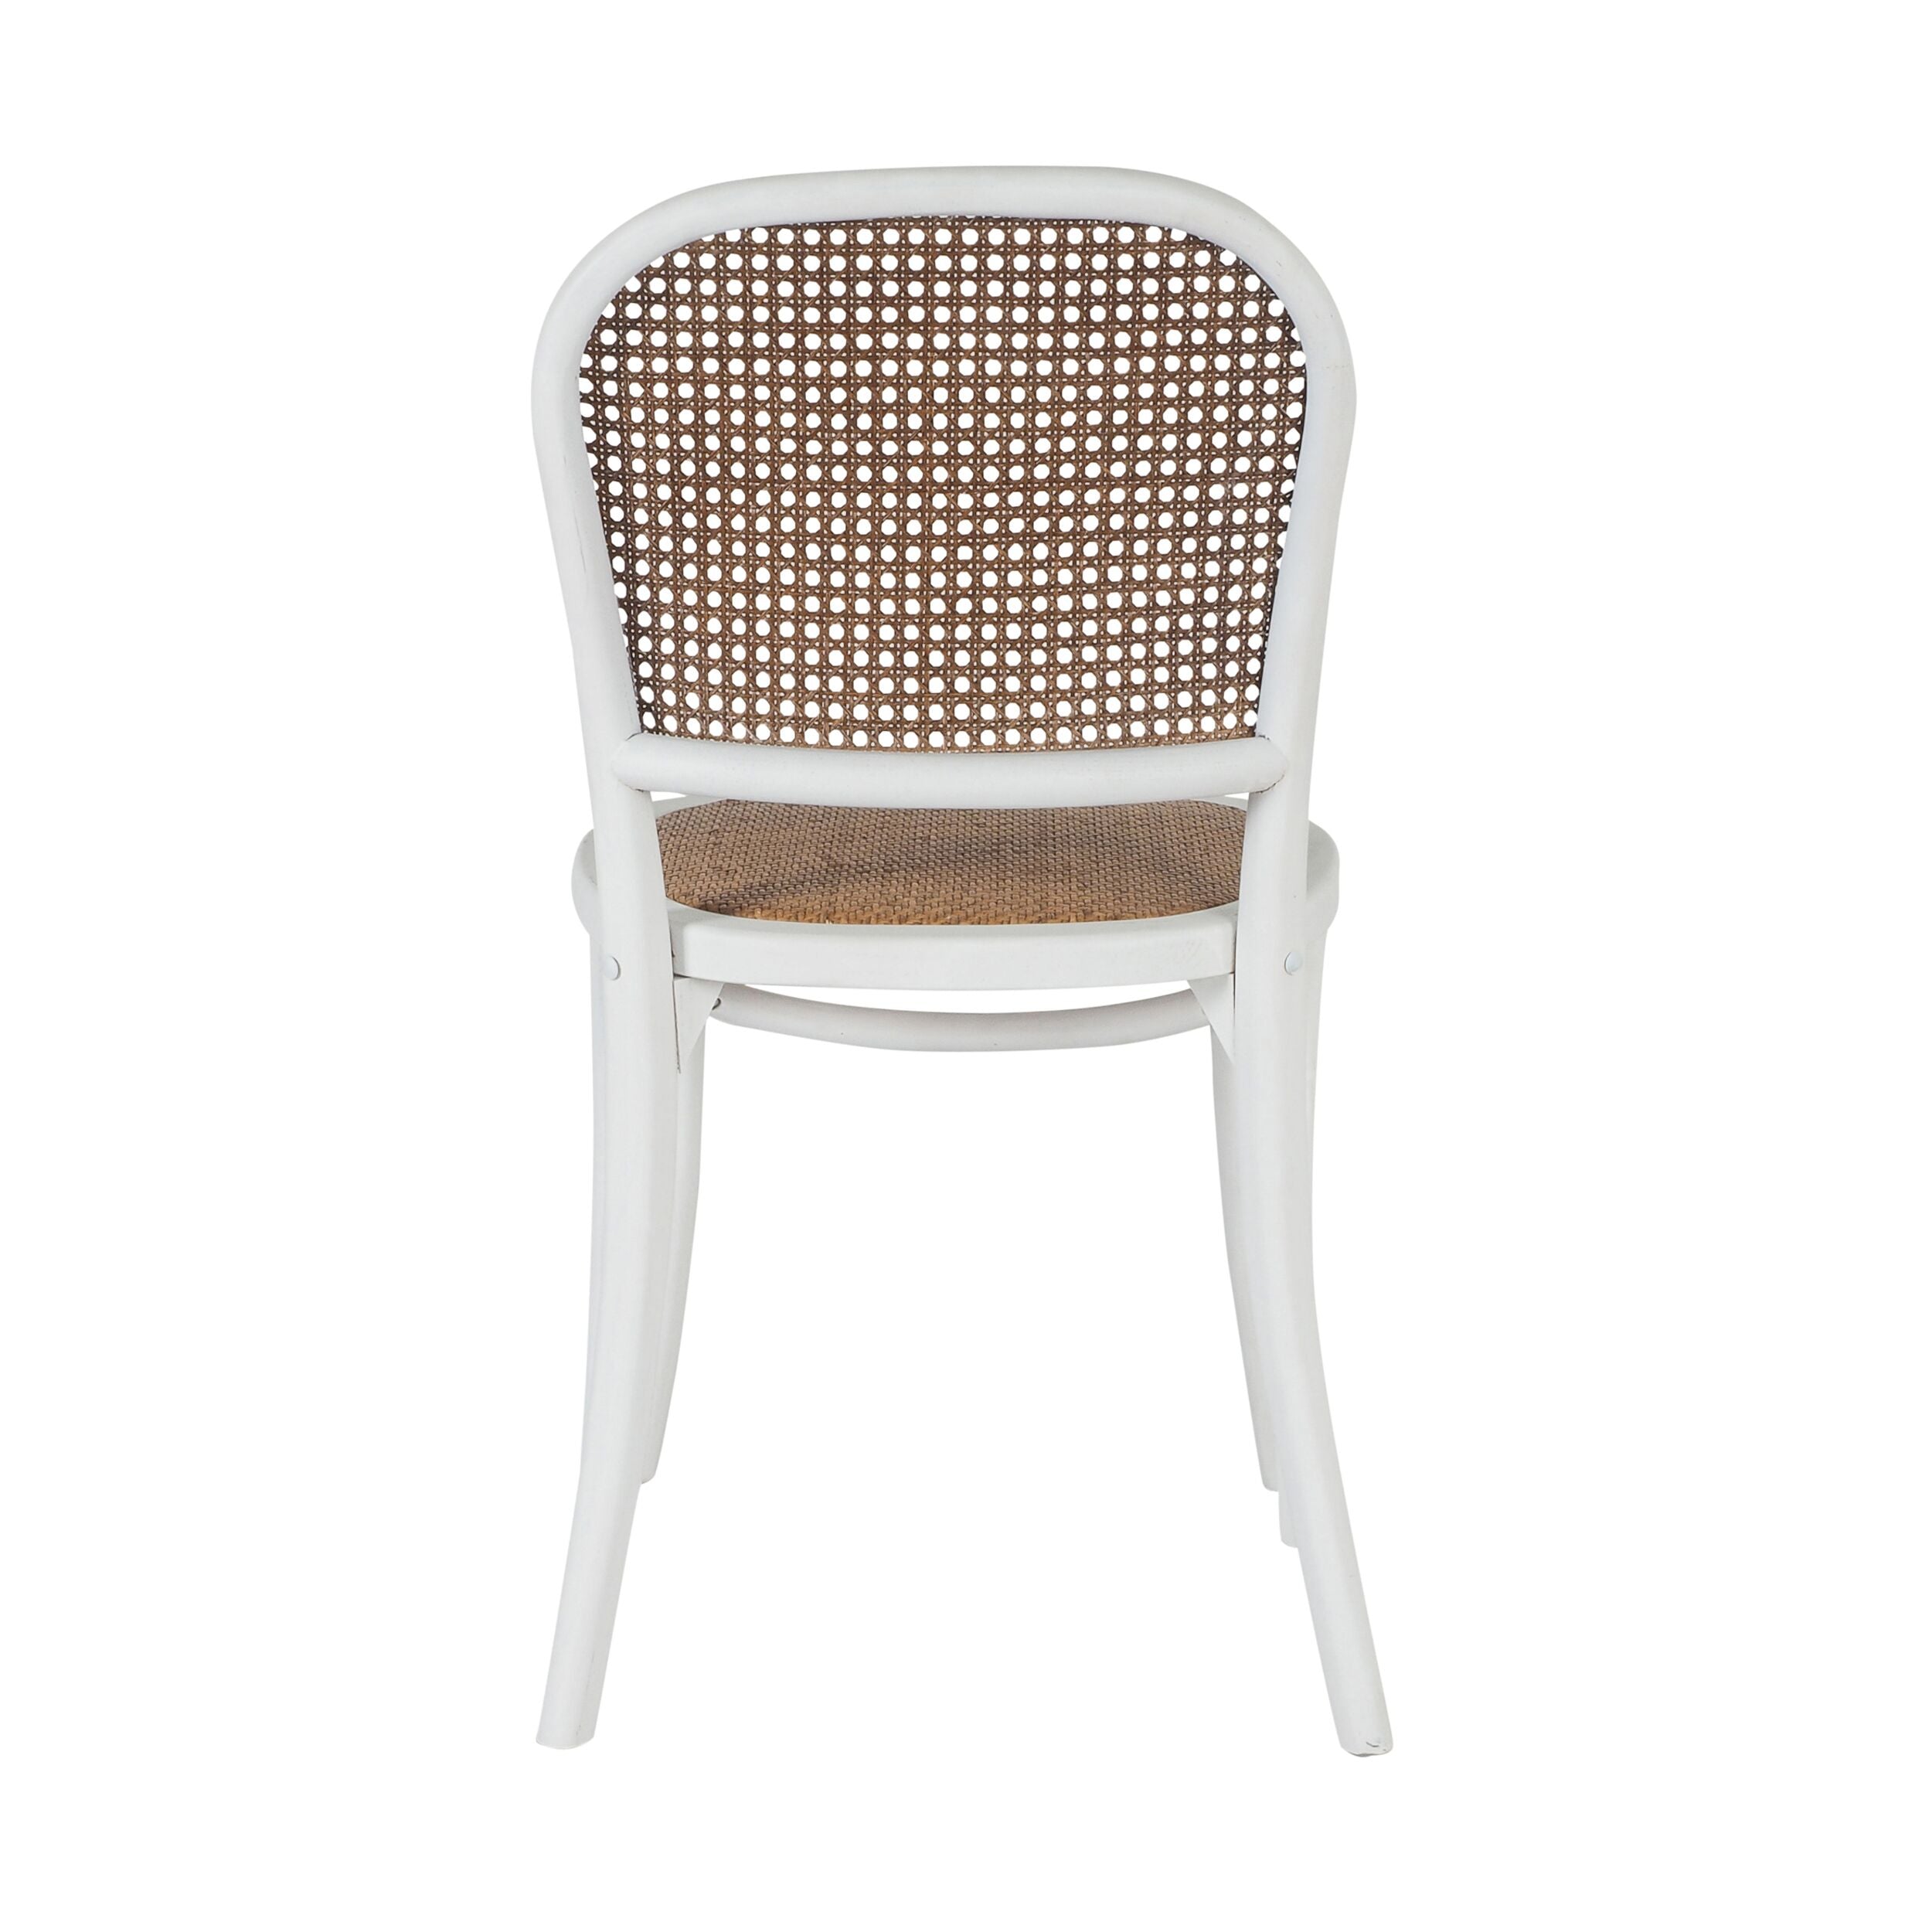 Bastion Dining Chair White